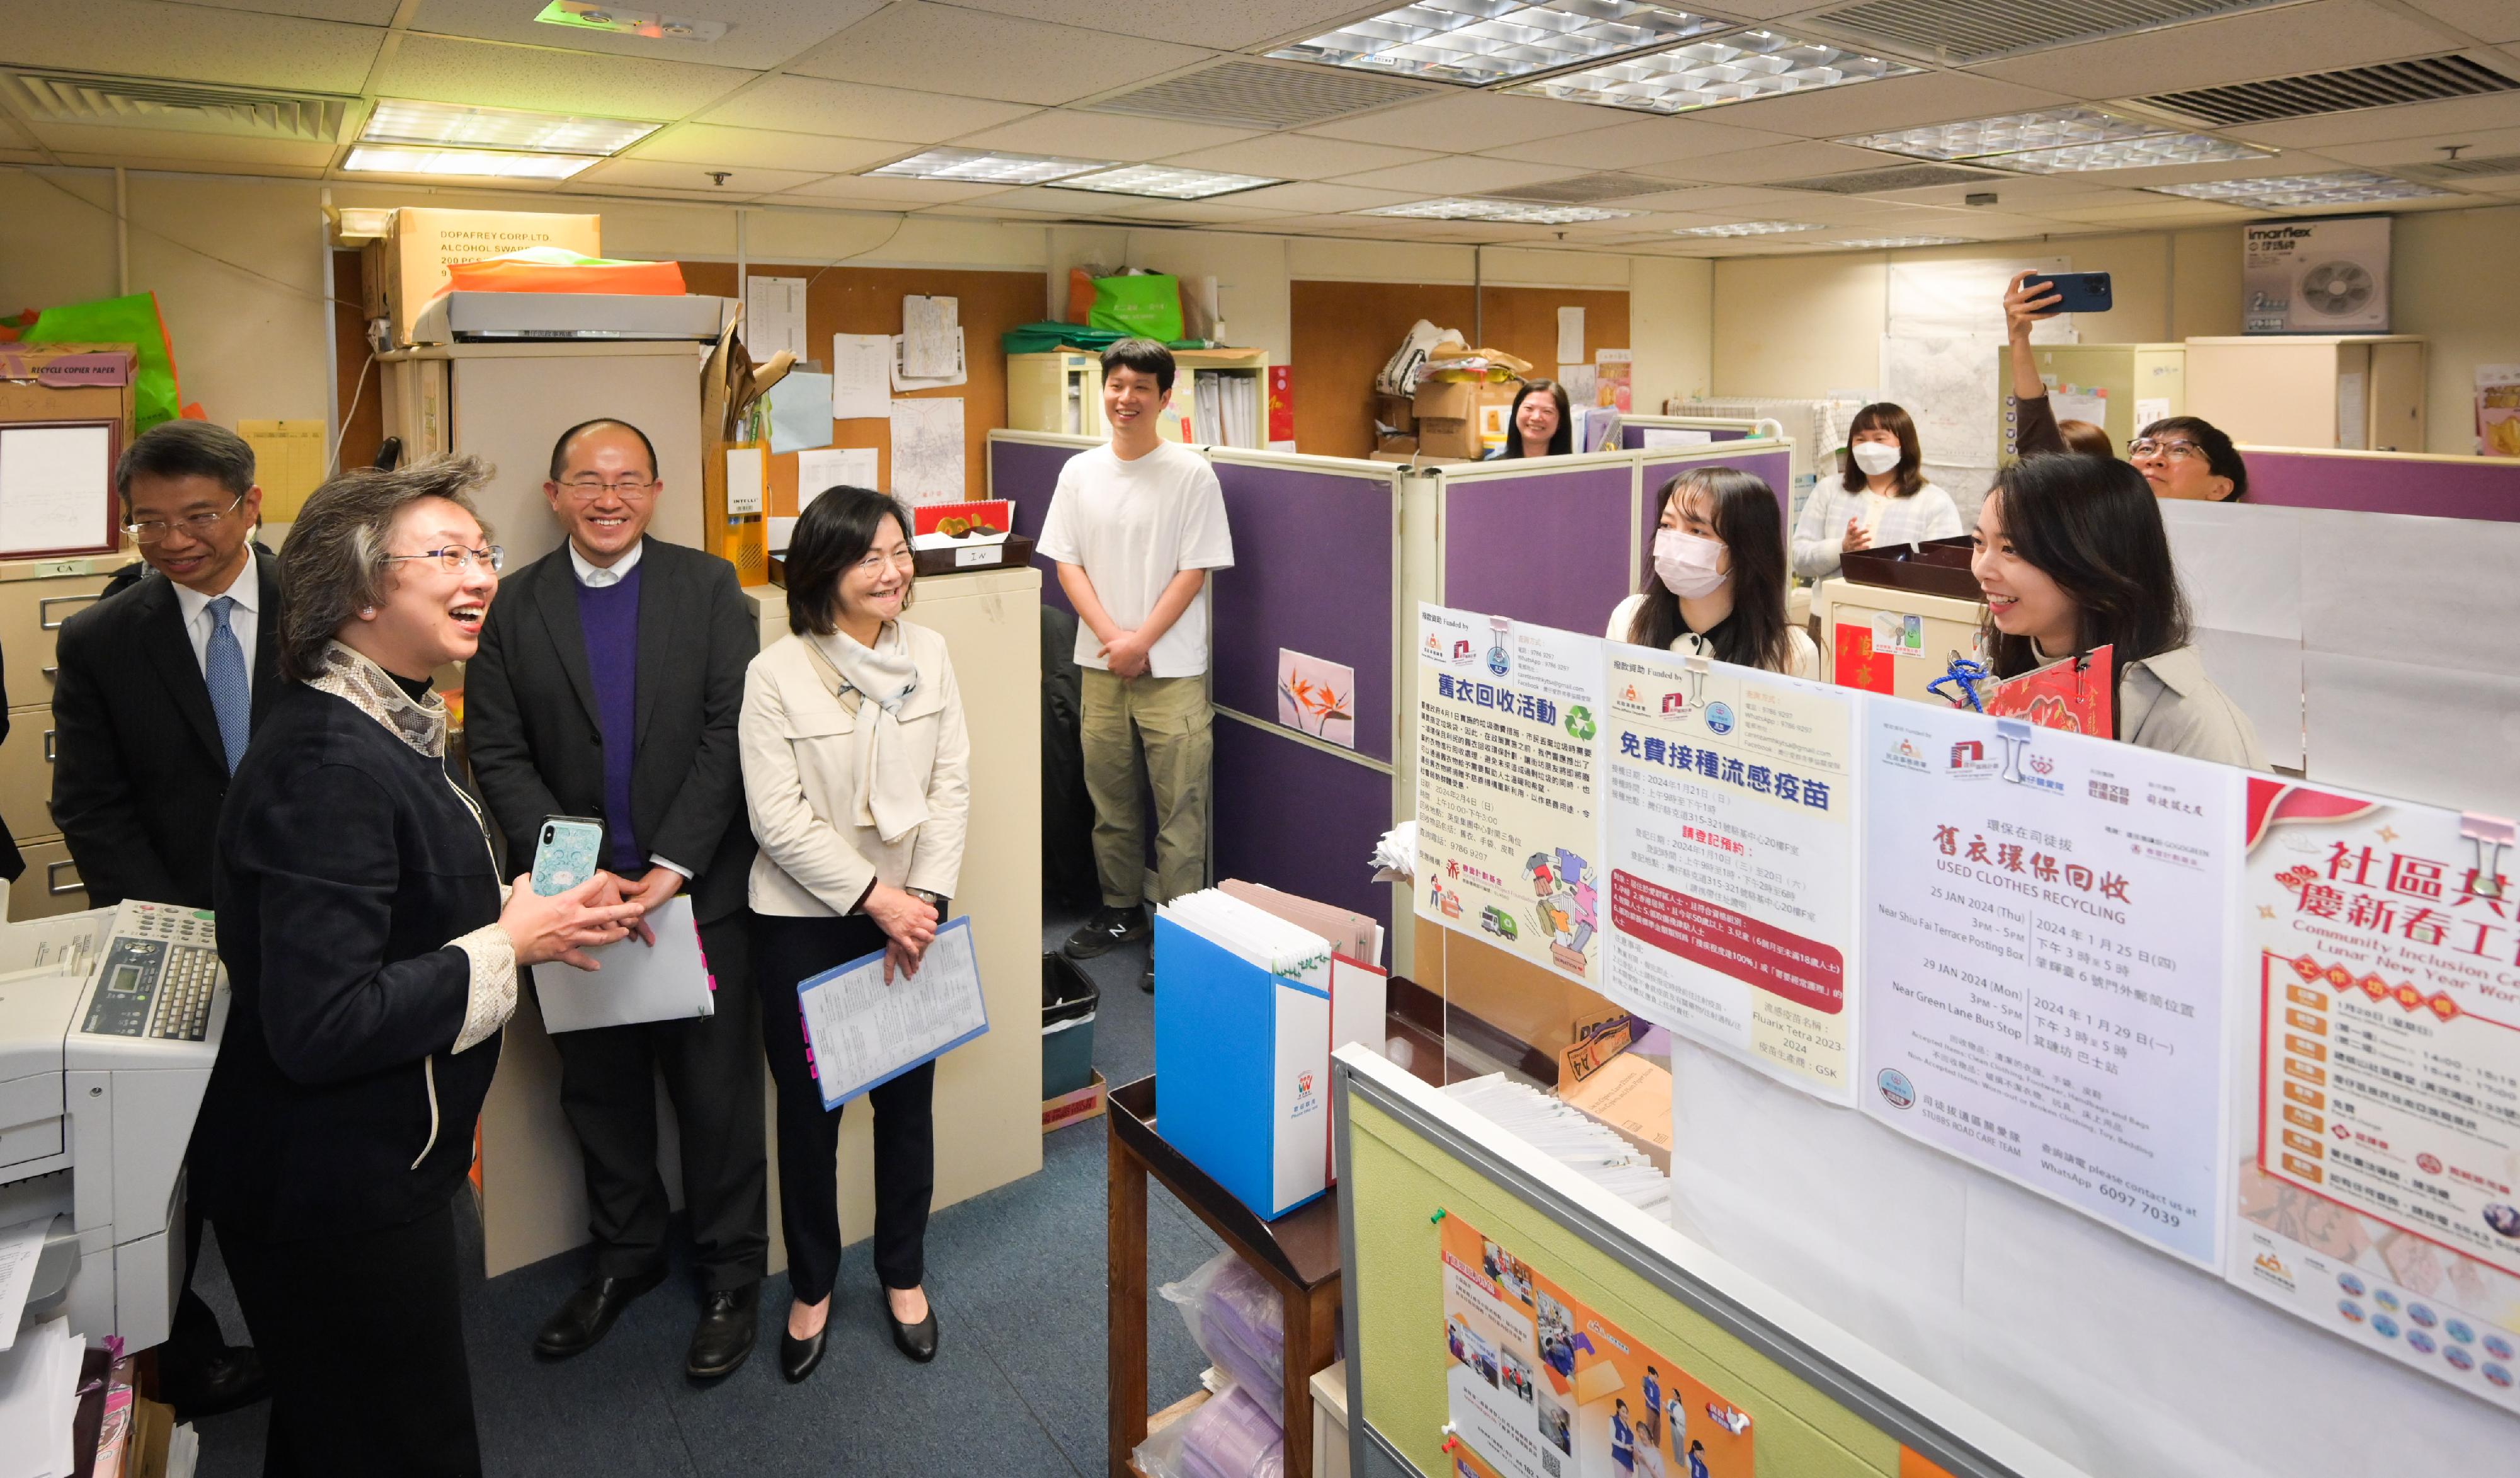 The Secretary for the Civil Service, Mrs Ingrid Yeung, visited the Home Affairs Department today (January 26) to learn about the work and challenges facing the department. Photo shows Mrs Yeung (second left) visiting the Community Affairs Section of the Wan Chai District Office to learn more about the various kinds of community services organised by the colleagues in the district.
